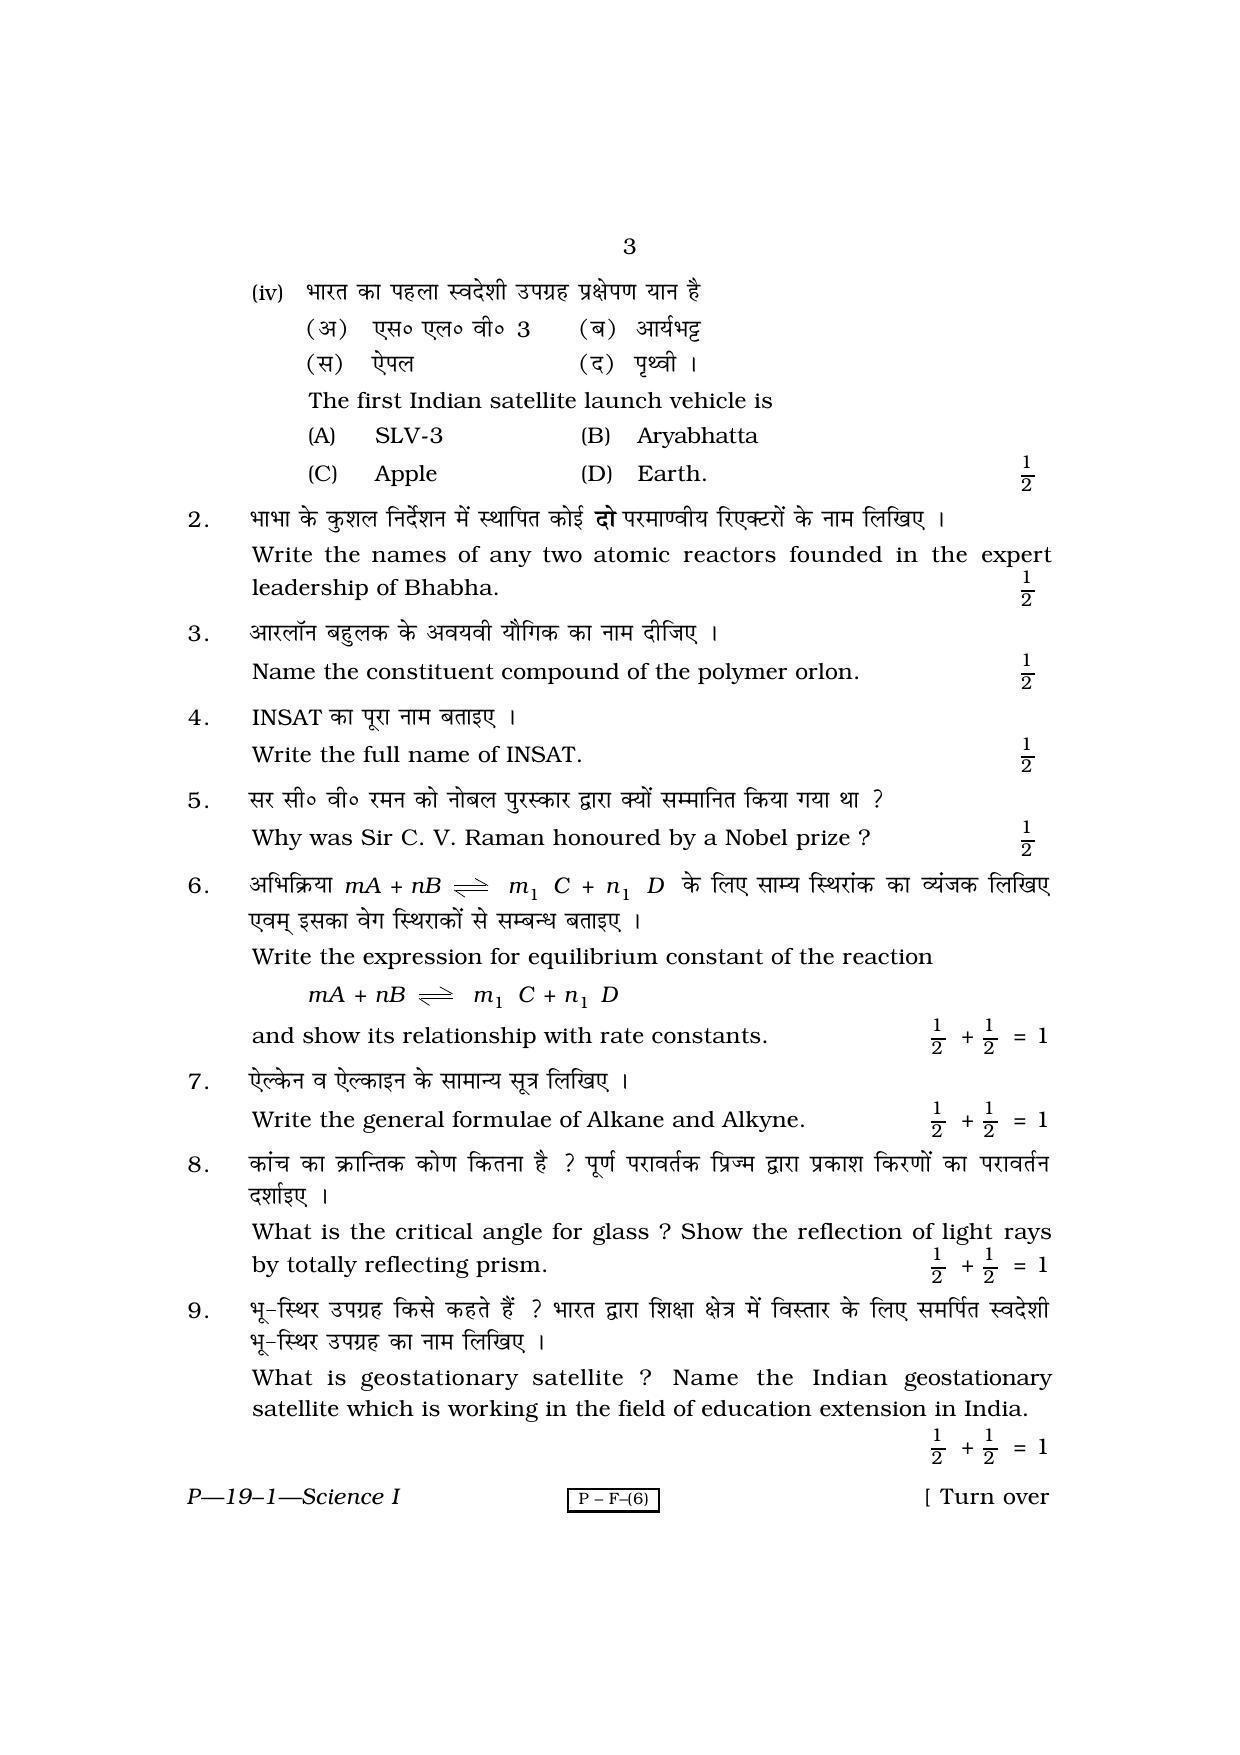 RBSE 2010 Science - I Praveshika Question Paper - Page 3